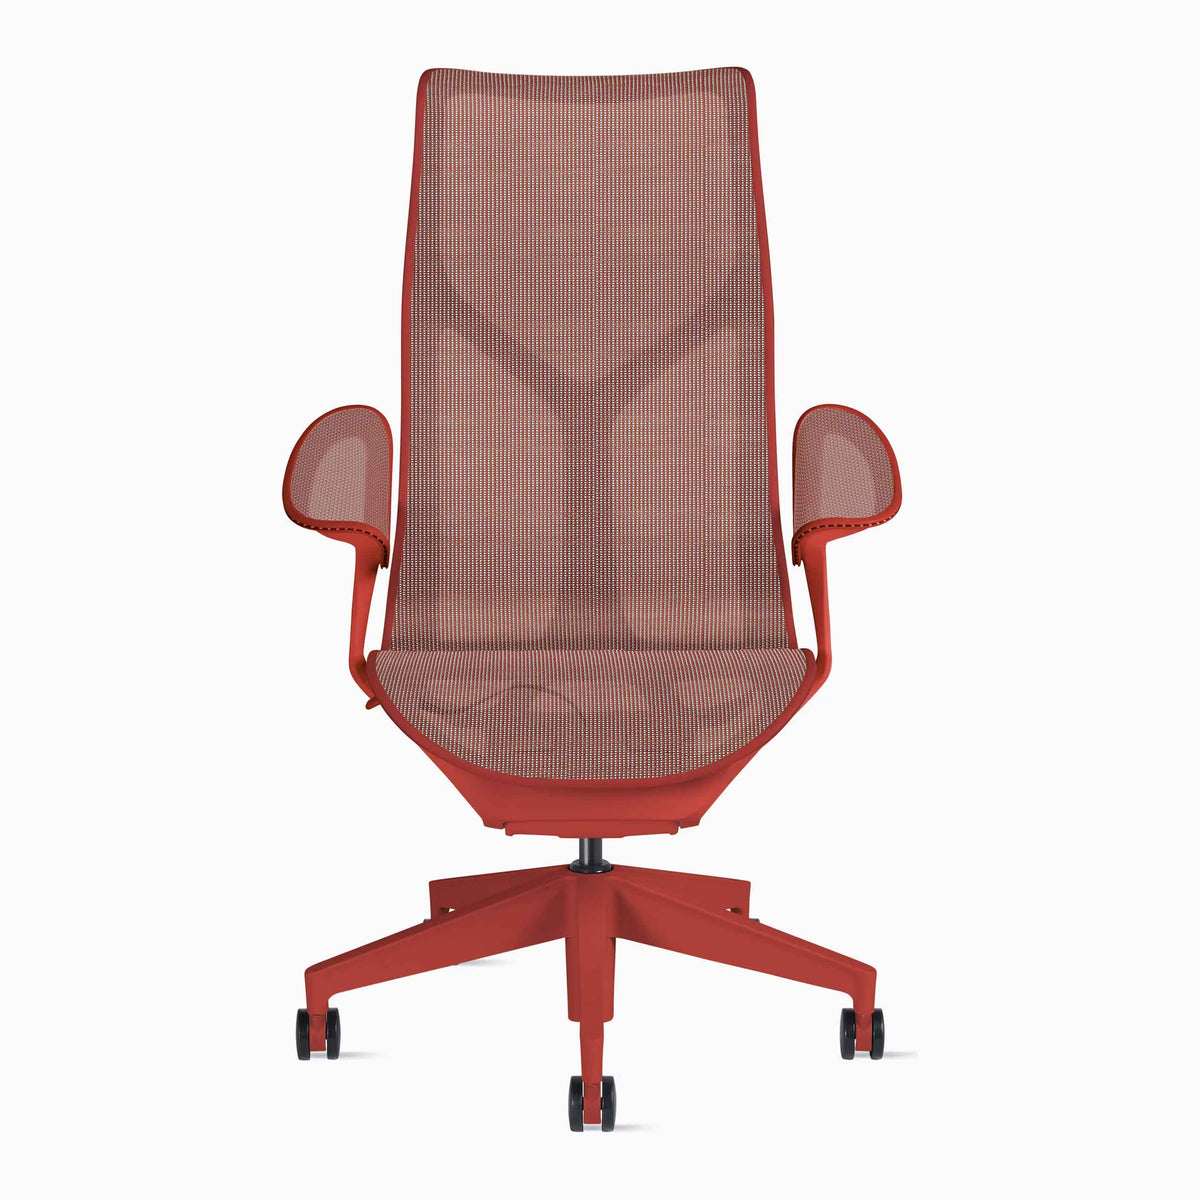 Cosm Chair - High Back